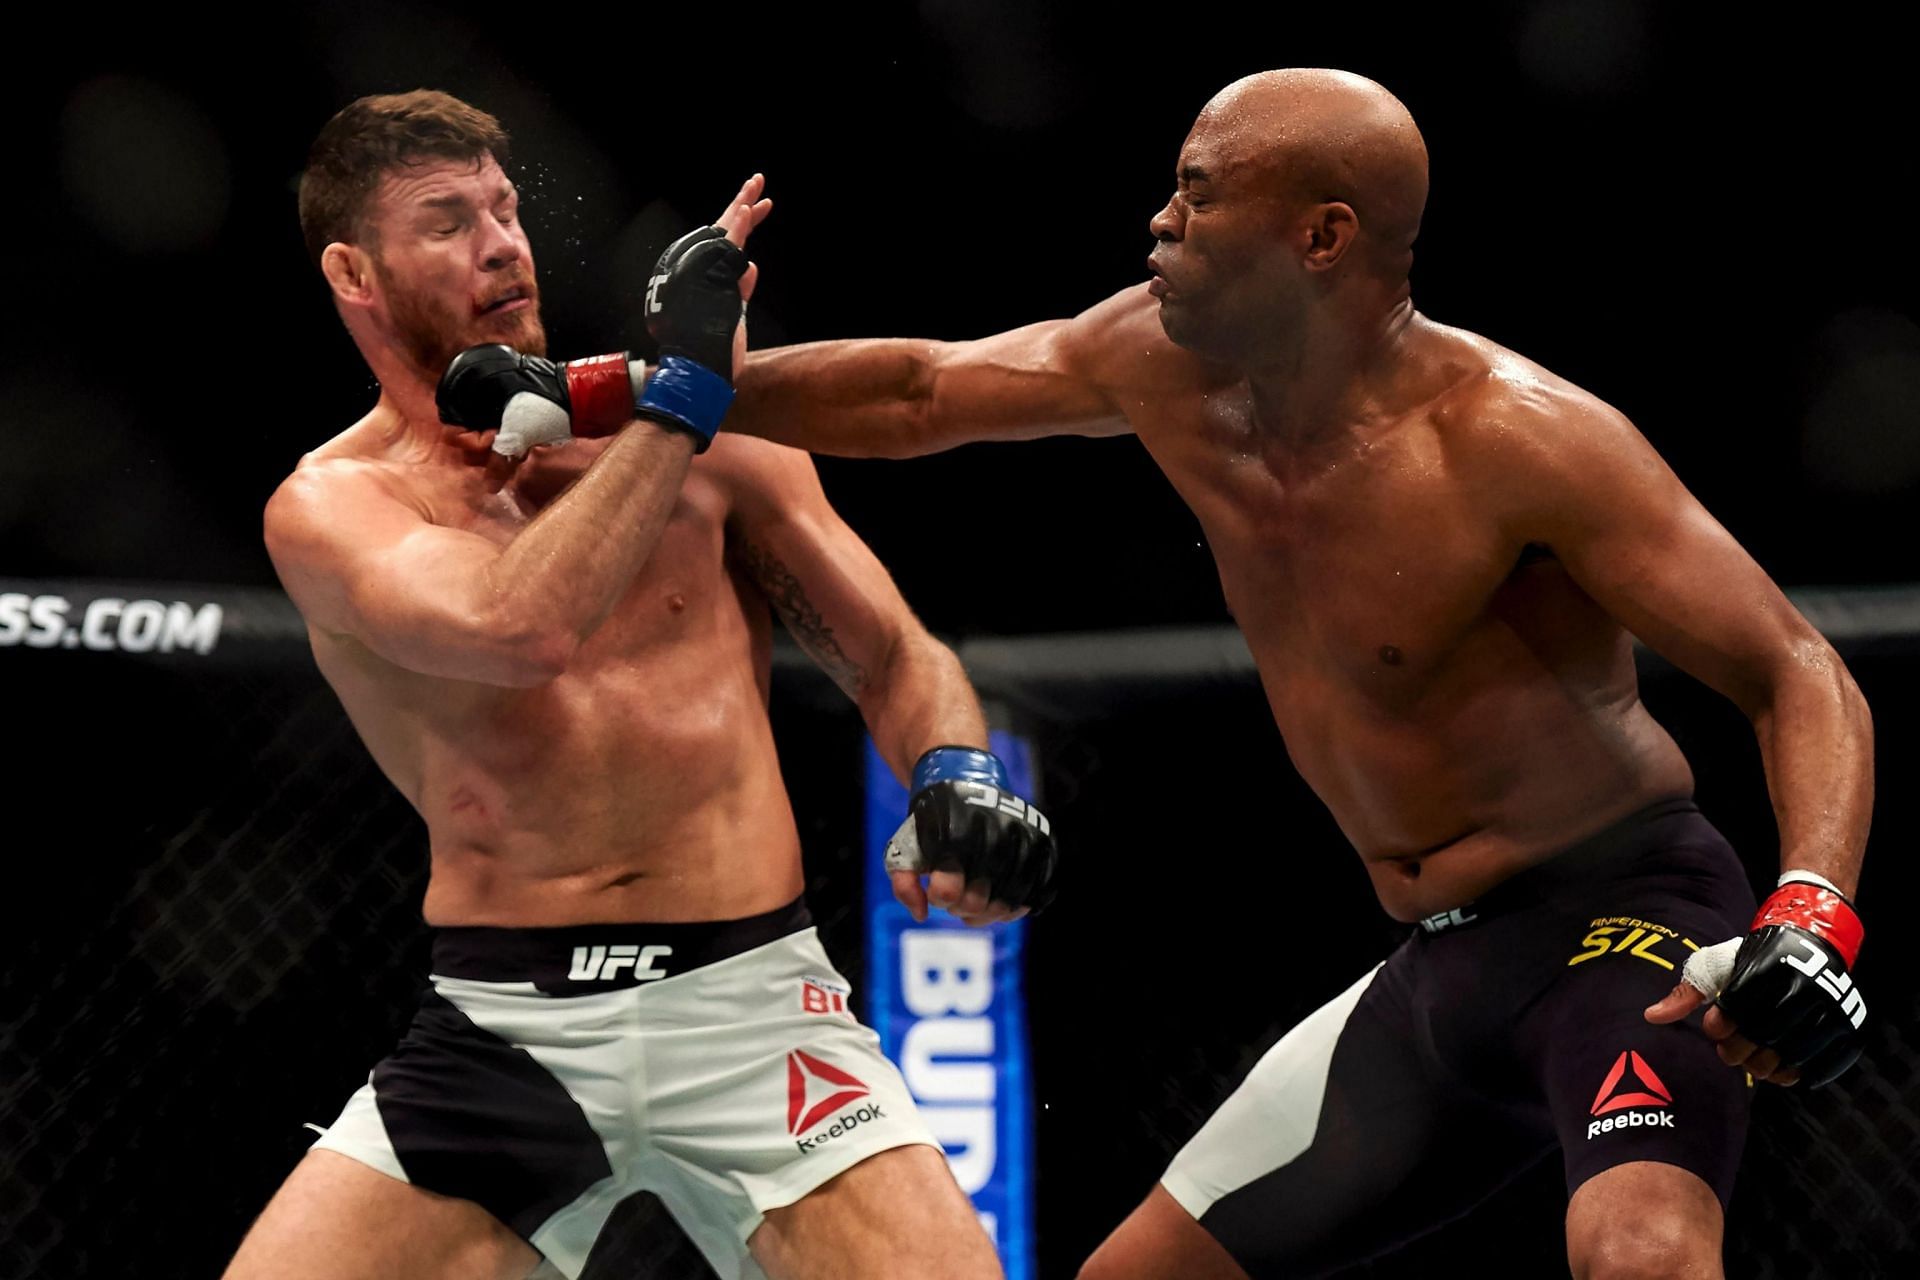 Michael Bisping and Anderson Silva produced a classic when they met in London in February 2016